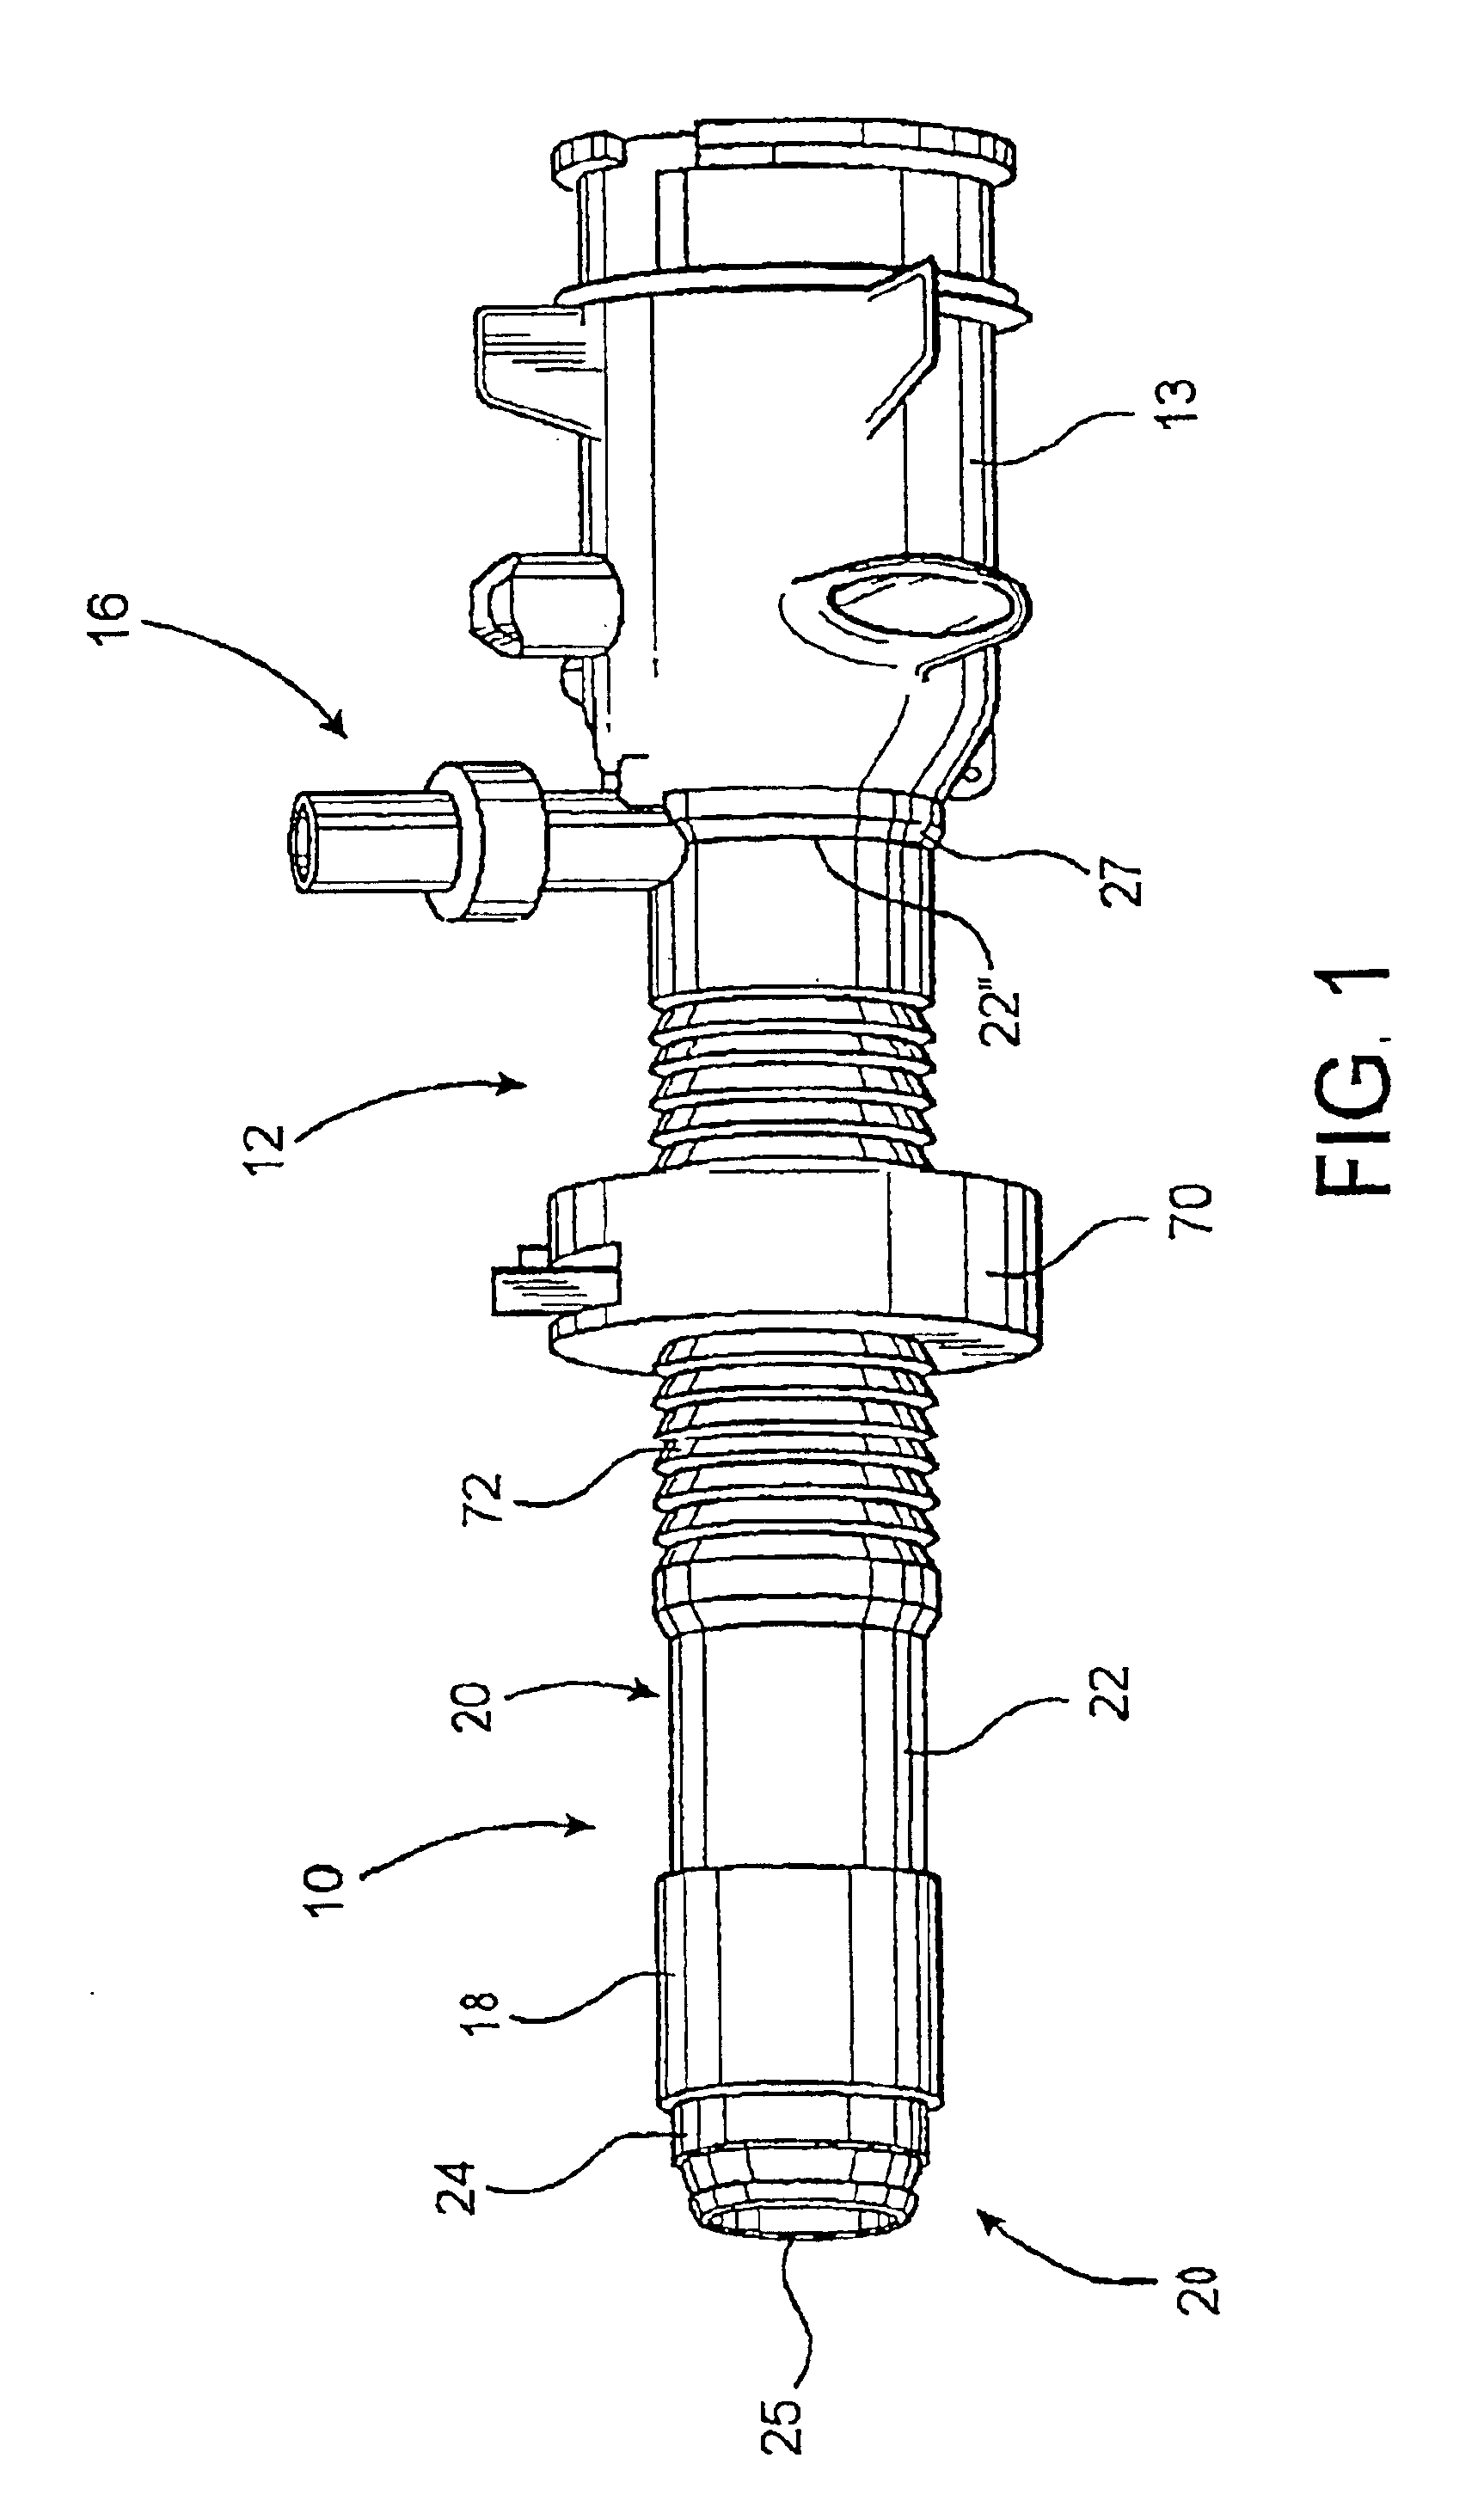 Anchoring assembly for a medical instrument